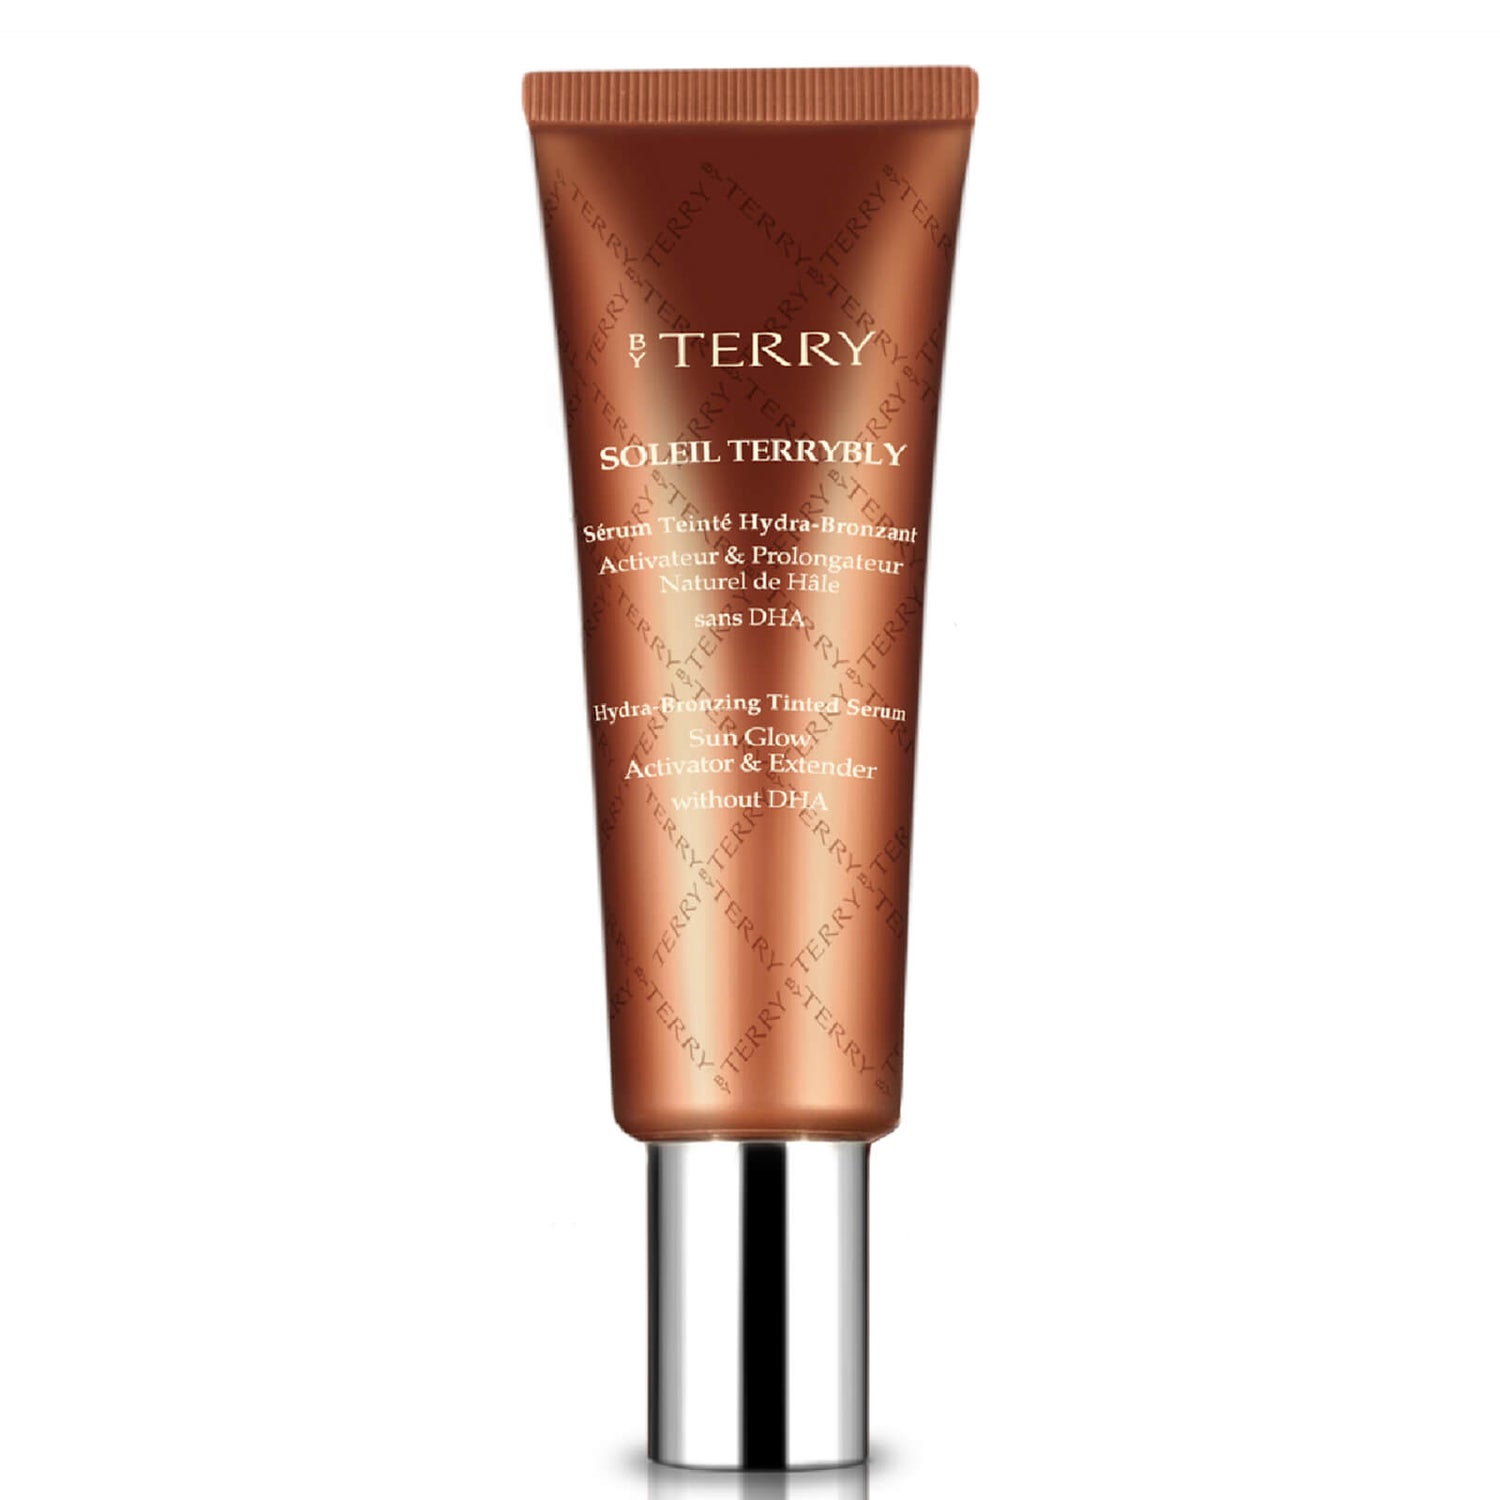 By Terry SOLEIL TERRYBLY Hydra-Bronzing Tinted Serum (35 ml.)